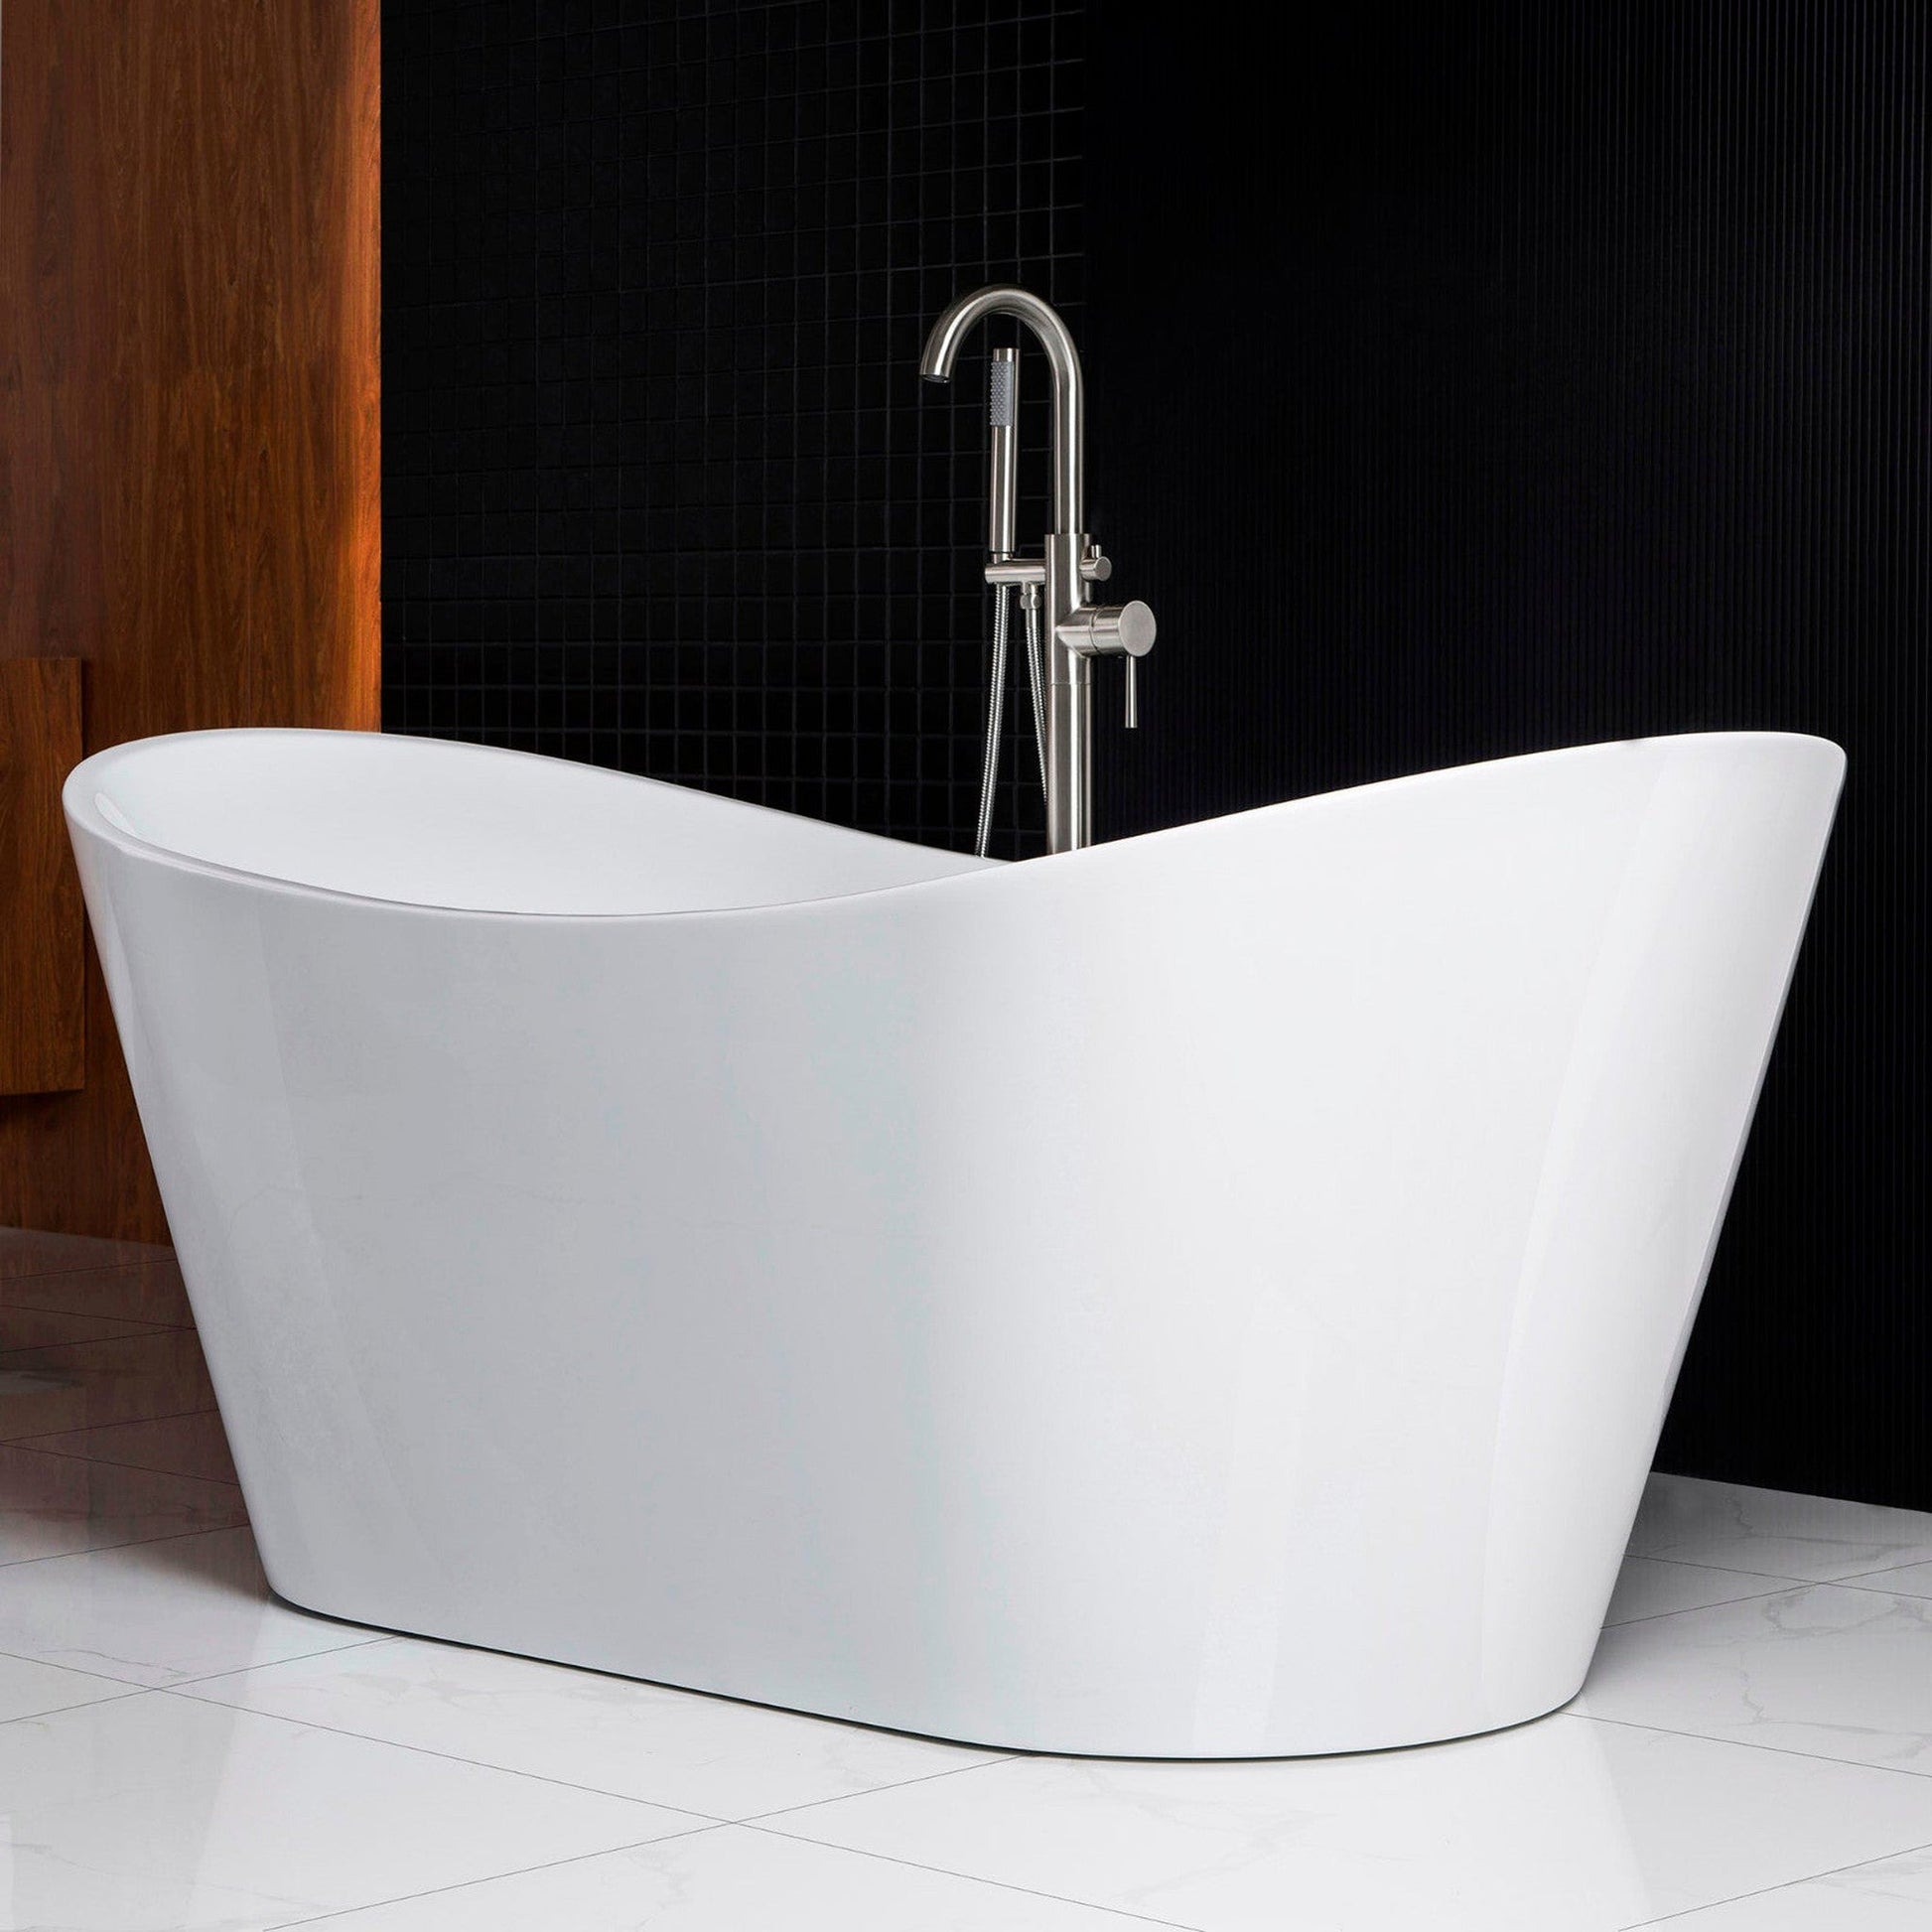 WoodBridge B0010 67" White Acrylic Freestanding Contemporary Soaking Bathtub With Chrome Drain, Overflow, F0024CHSQ Tub Filler and Caddy Tray